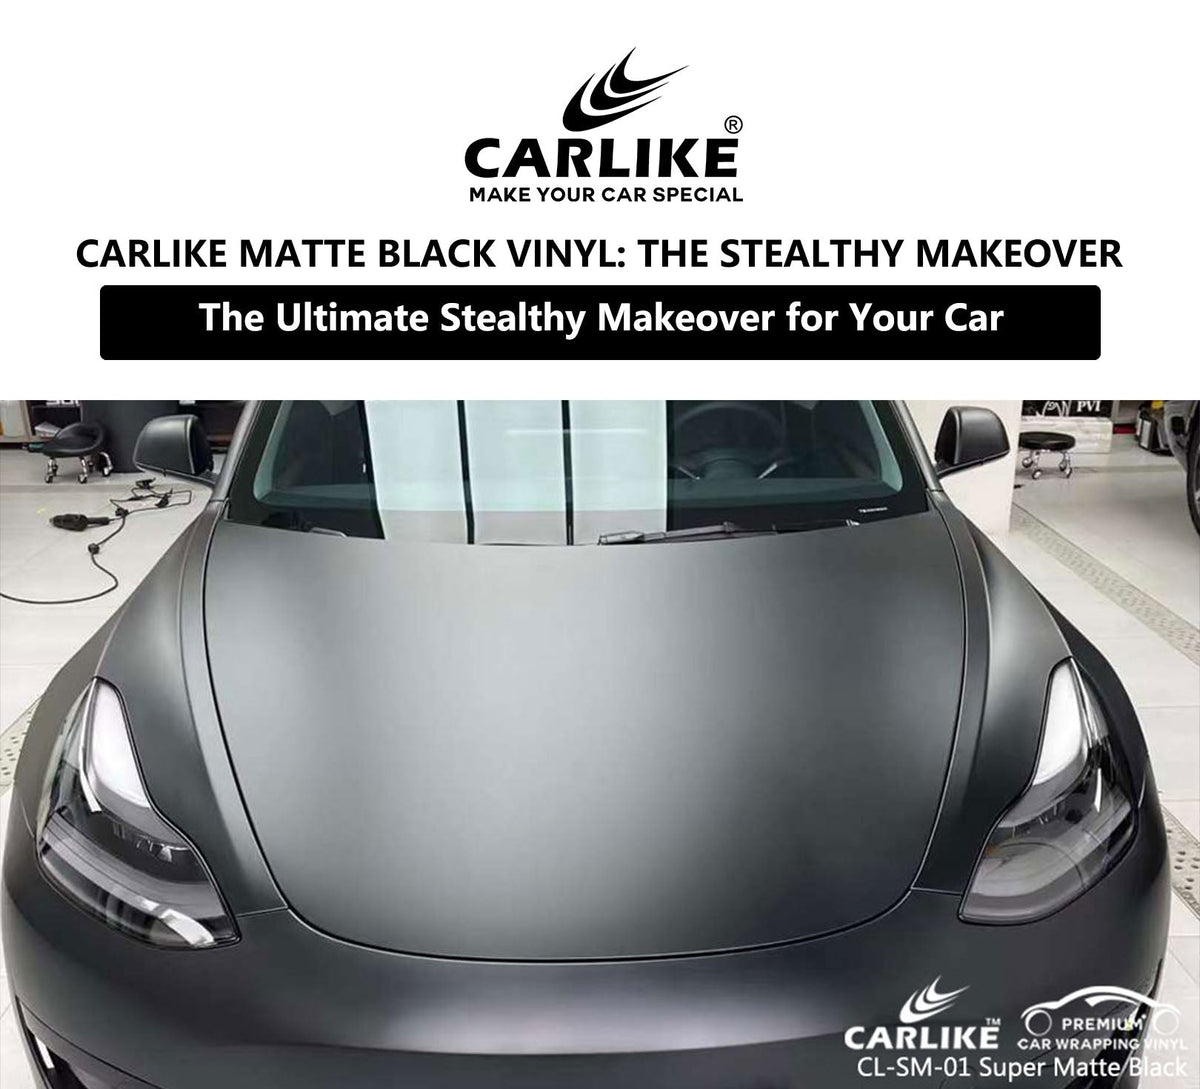 CARLIKE Matte Black Vinyl: The Ultimate Stealthy Makeover for Your Car –  CARLIKE WRAP